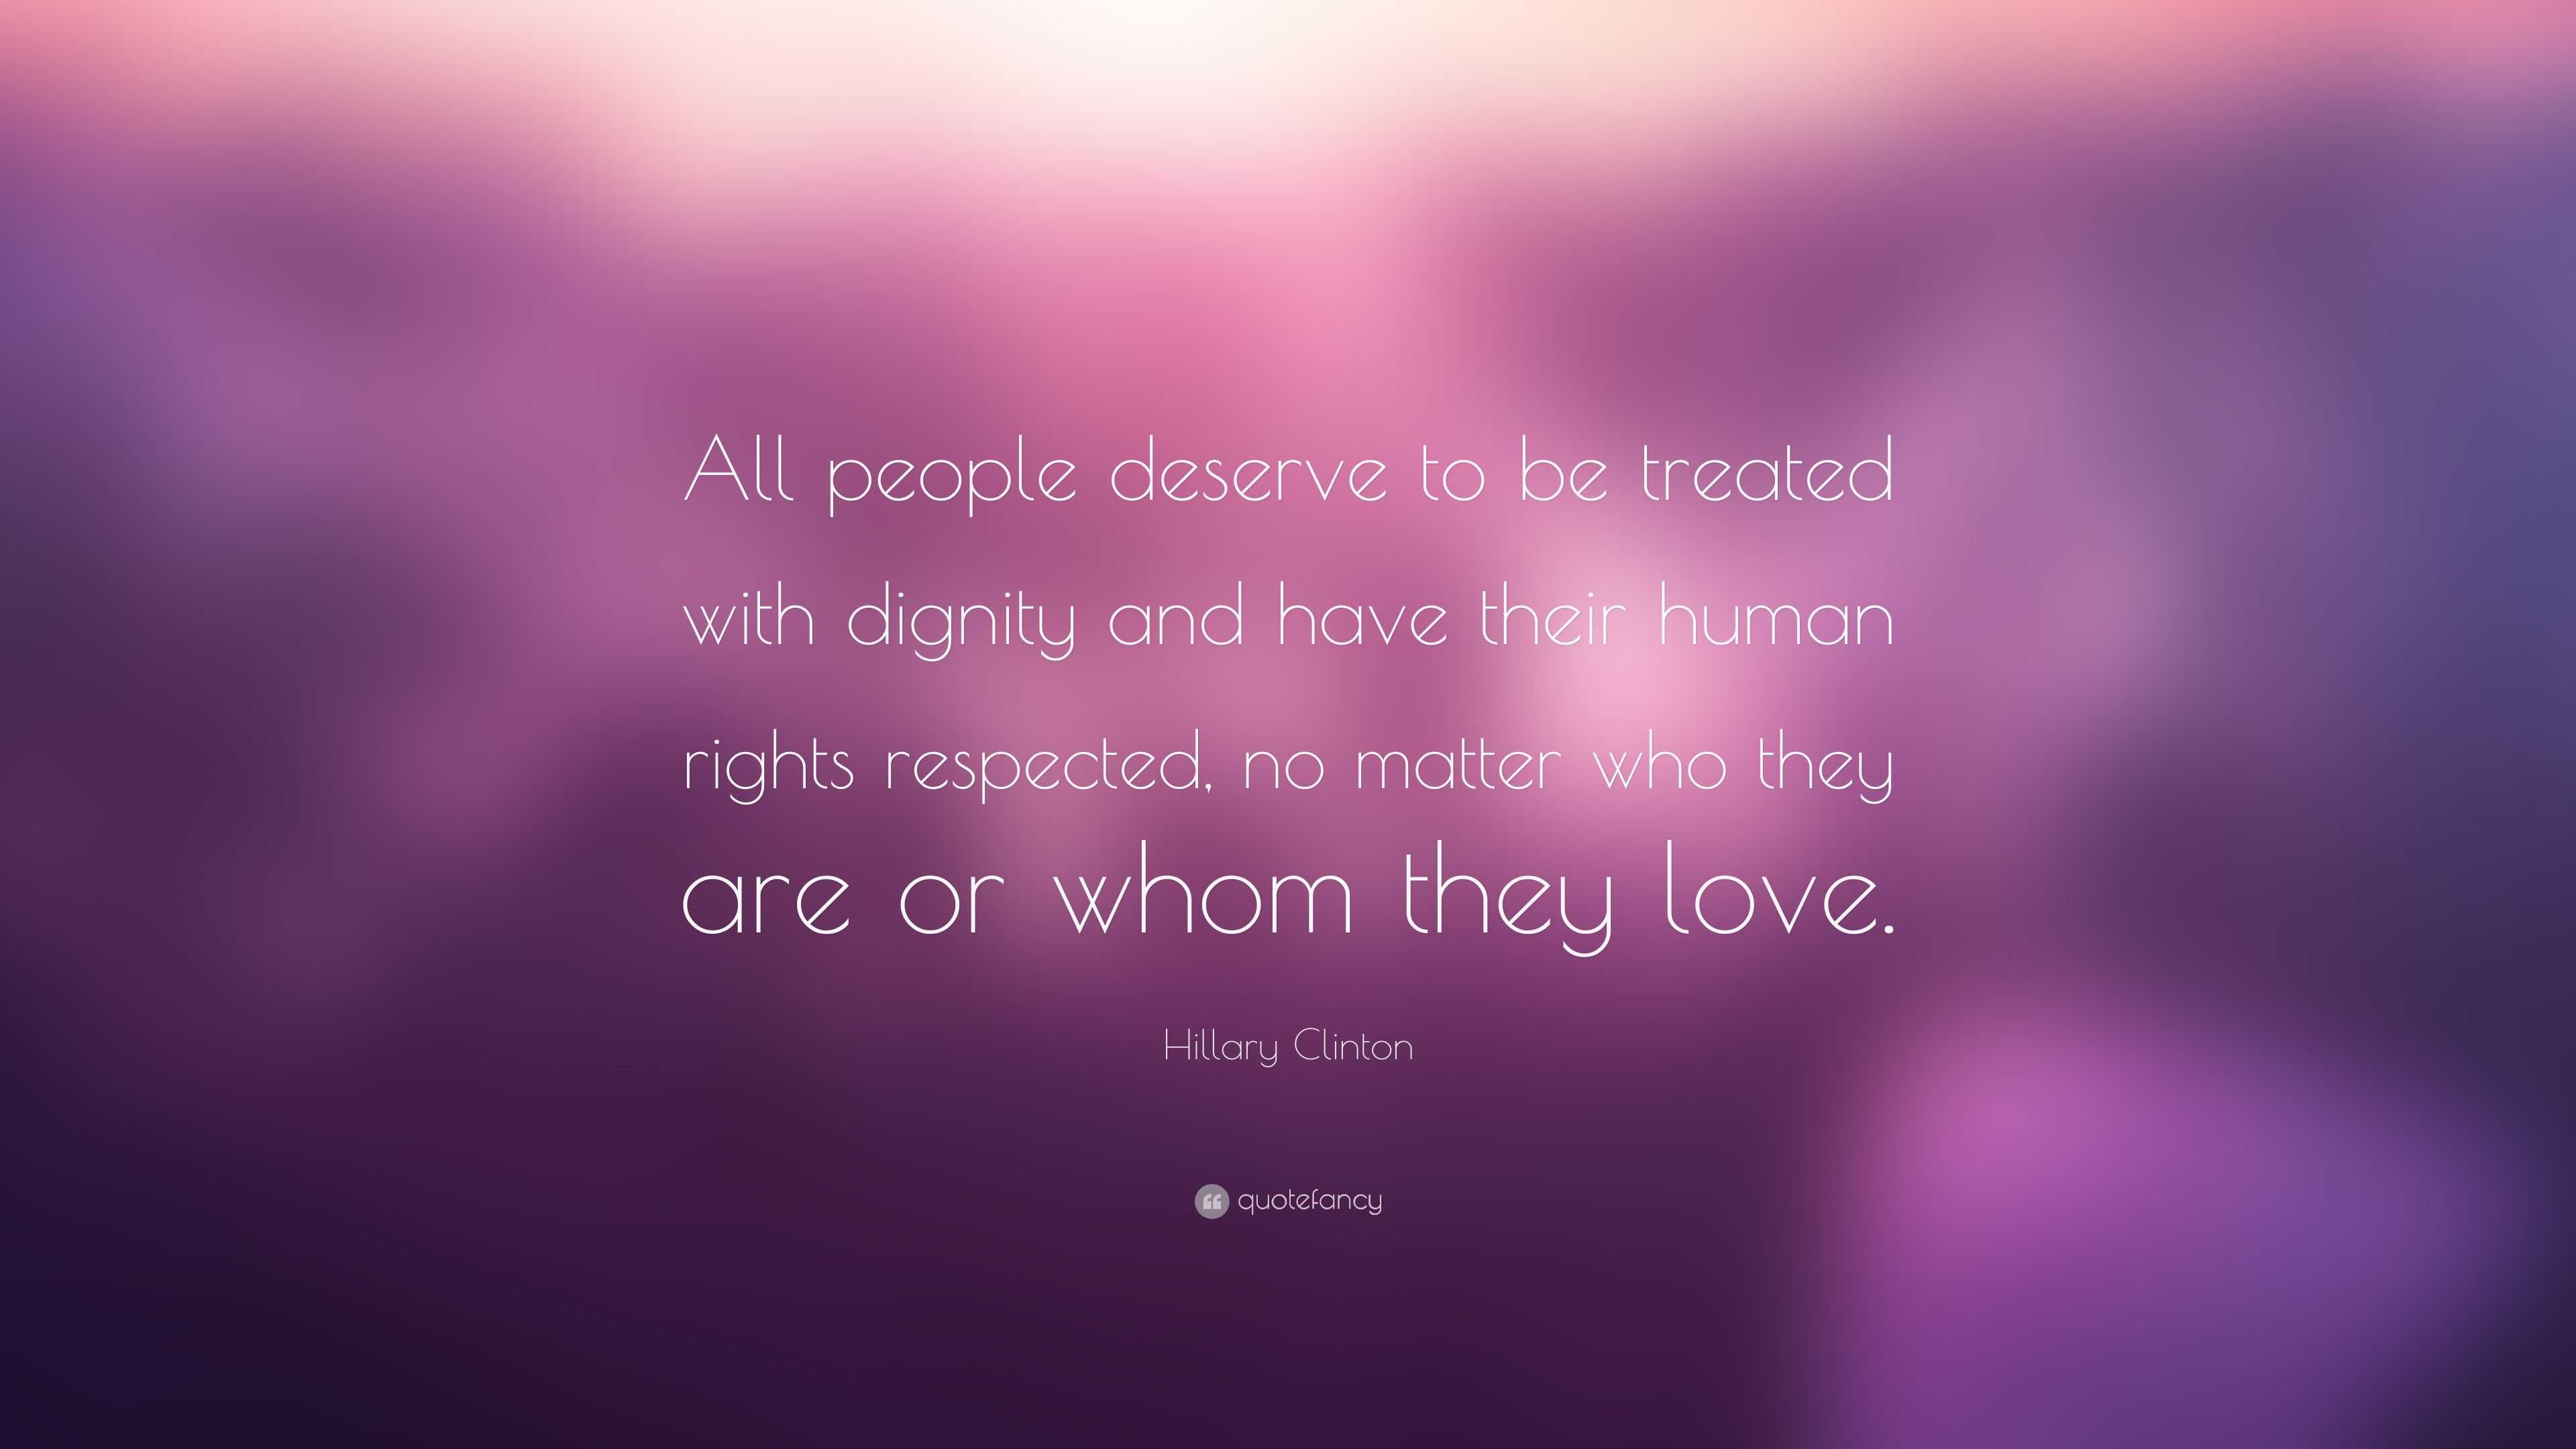 Hillary Clinton Quote: “All people deserve to be treated with dignity ...